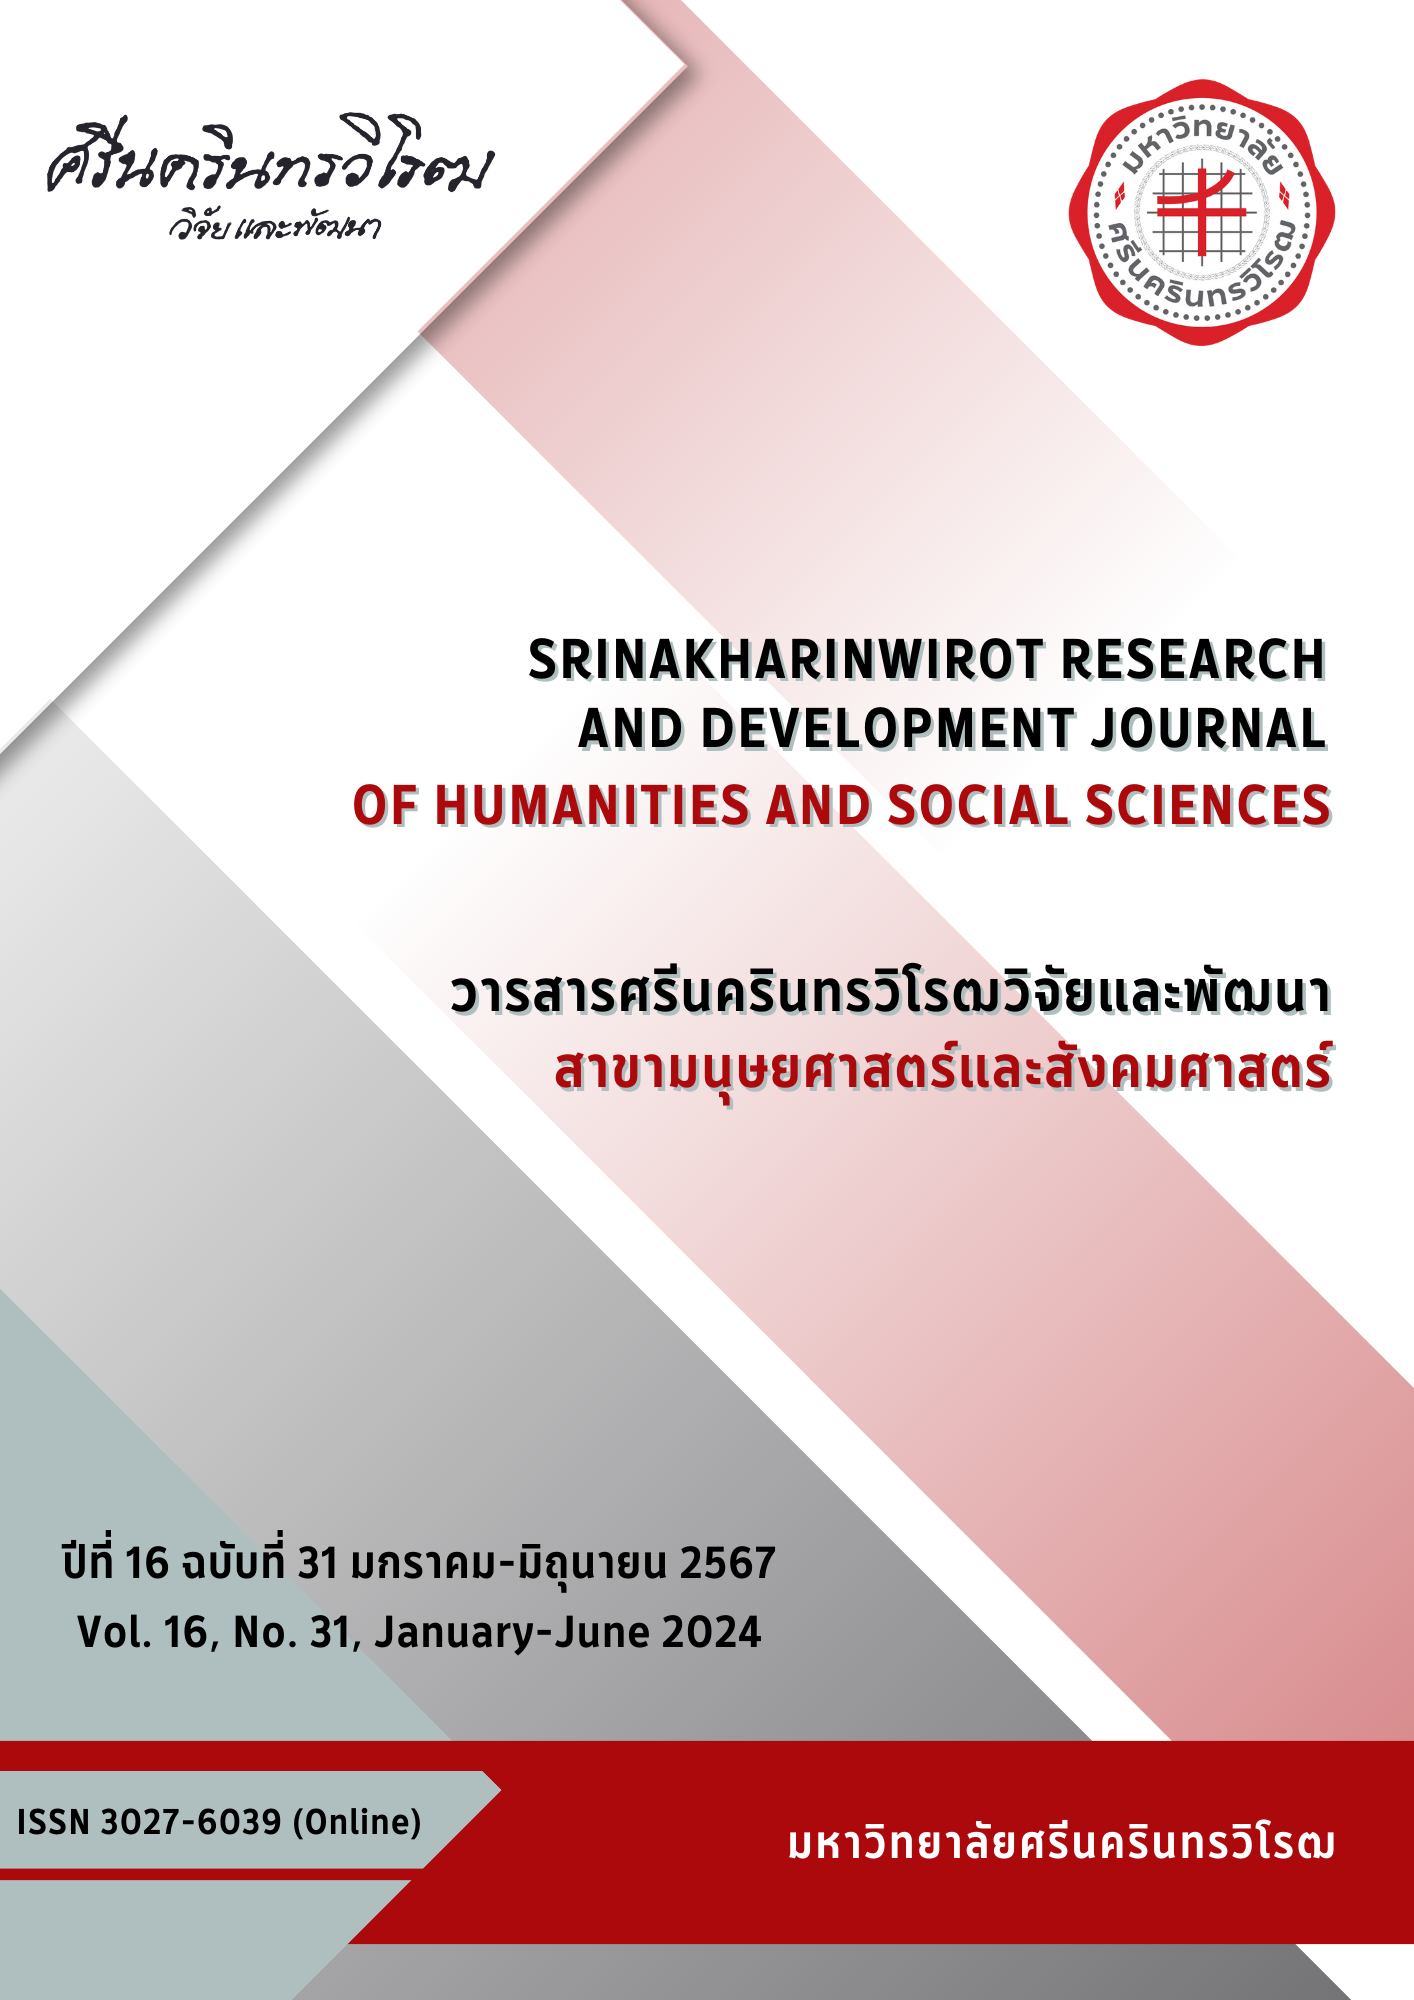 					View Vol. 16 No. 31, January-June (2024): Srinakharinwirot Research and Development Journal of Humanities and Social Sciences
				